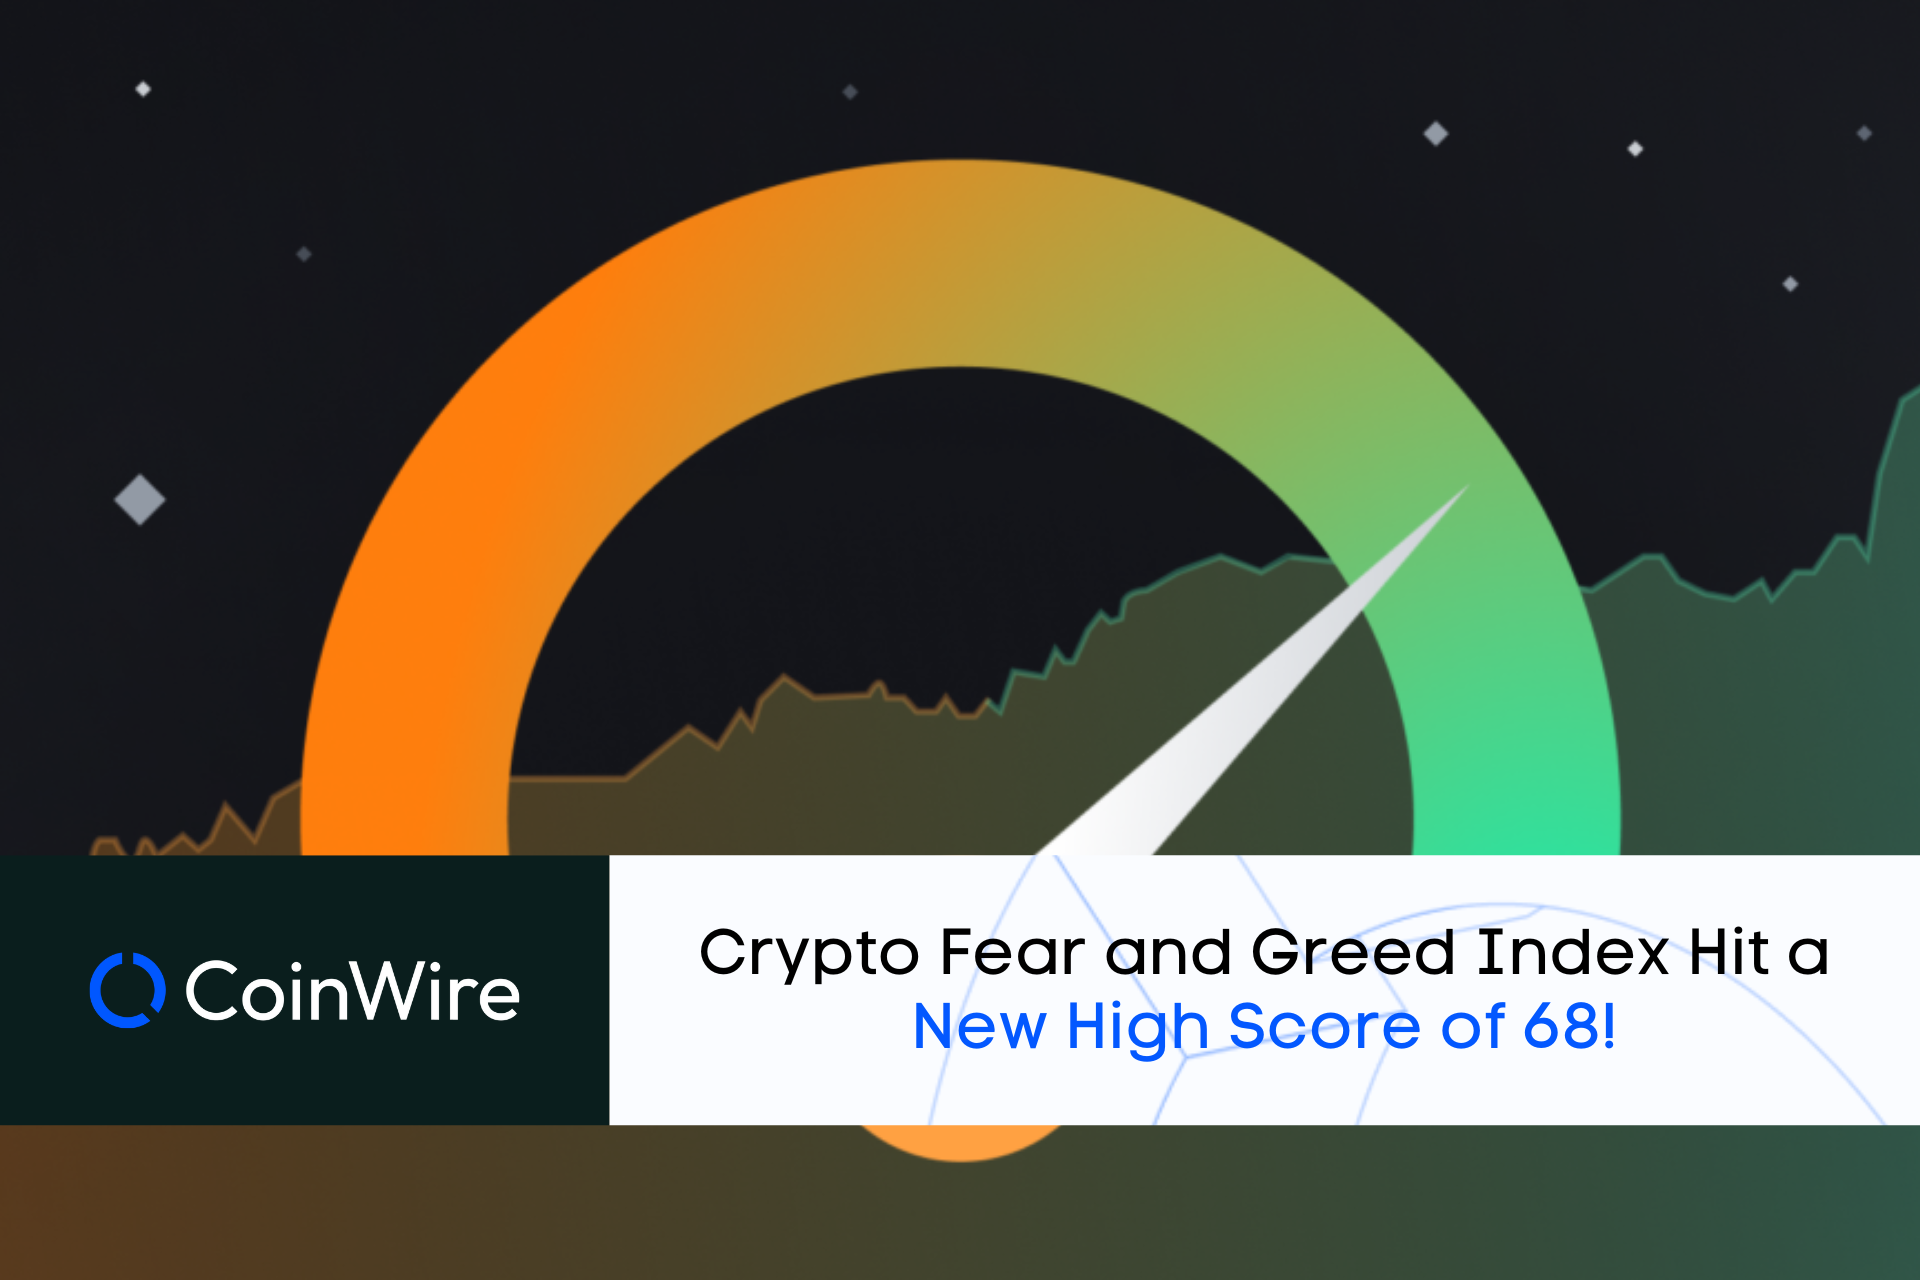 Crypto Fear And Greed Index Hit A New High Score Of 68!